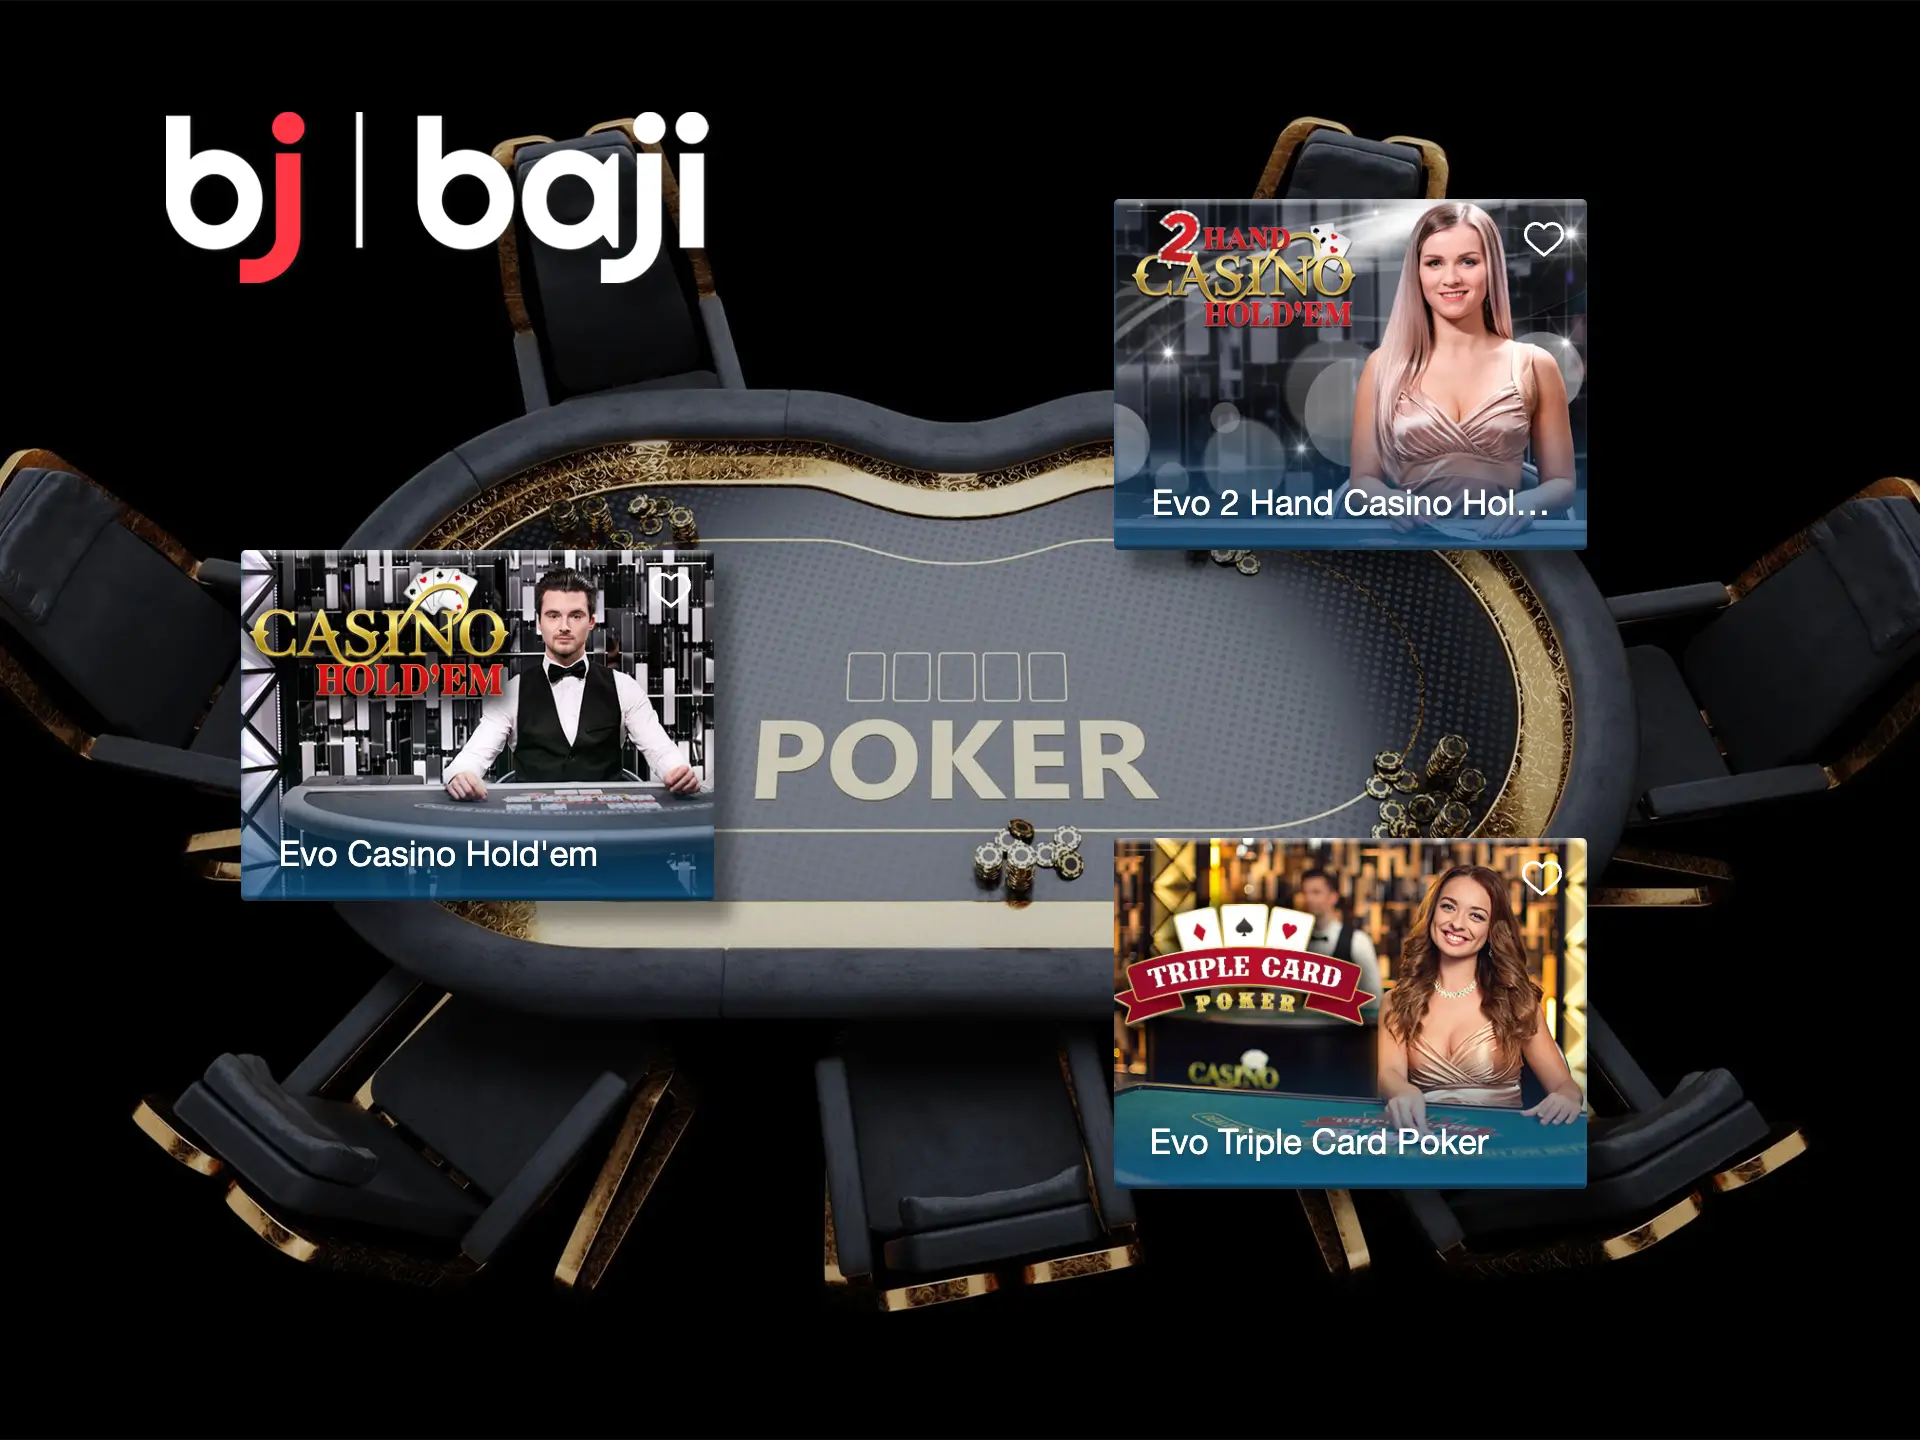 Compete in Baji poker for the title of best player.